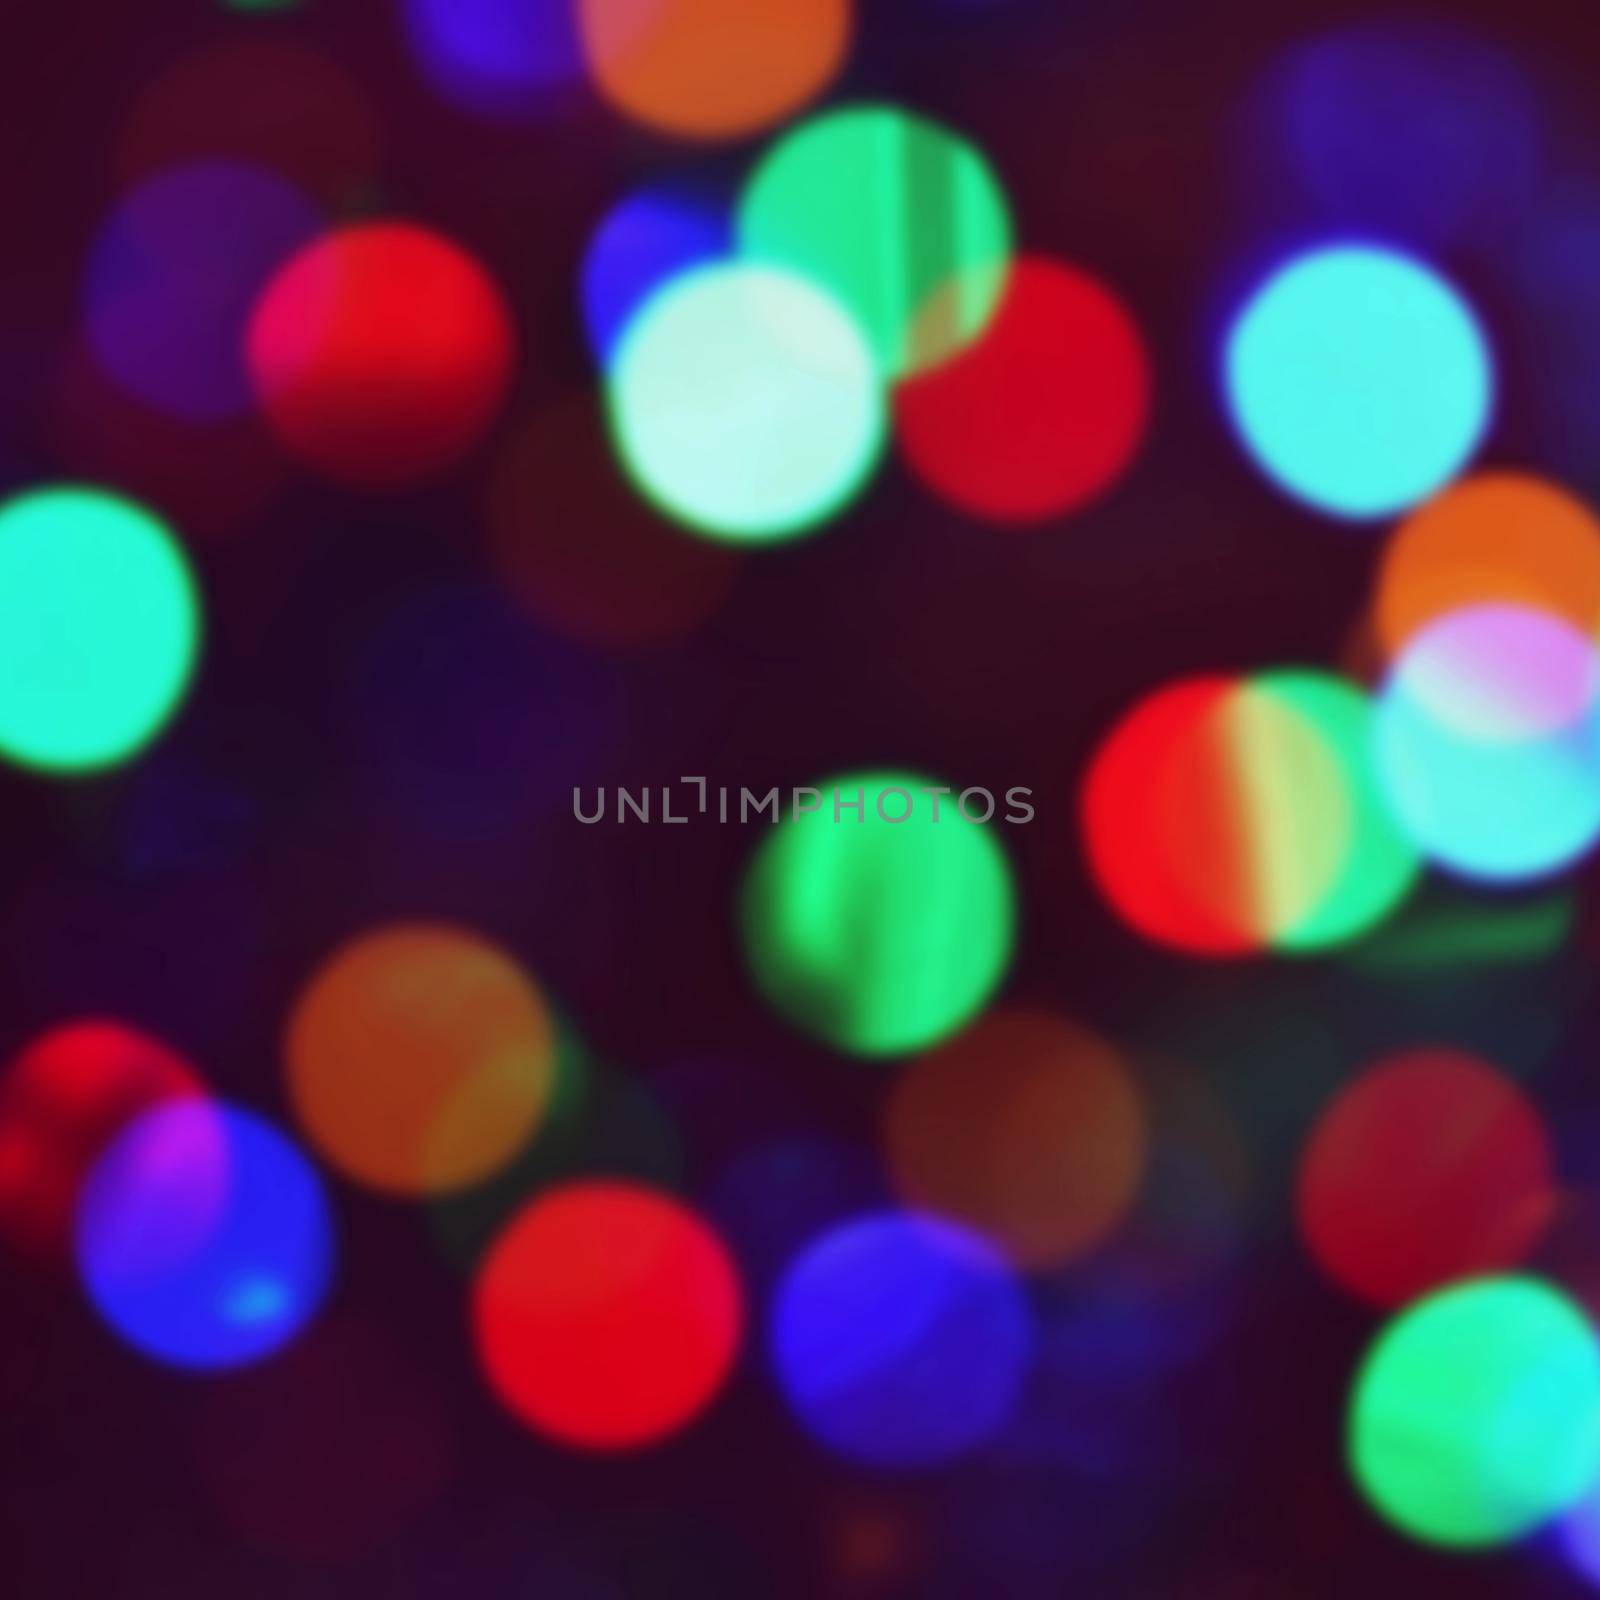 Blurred xmas background, christmas texture and background from color lights.